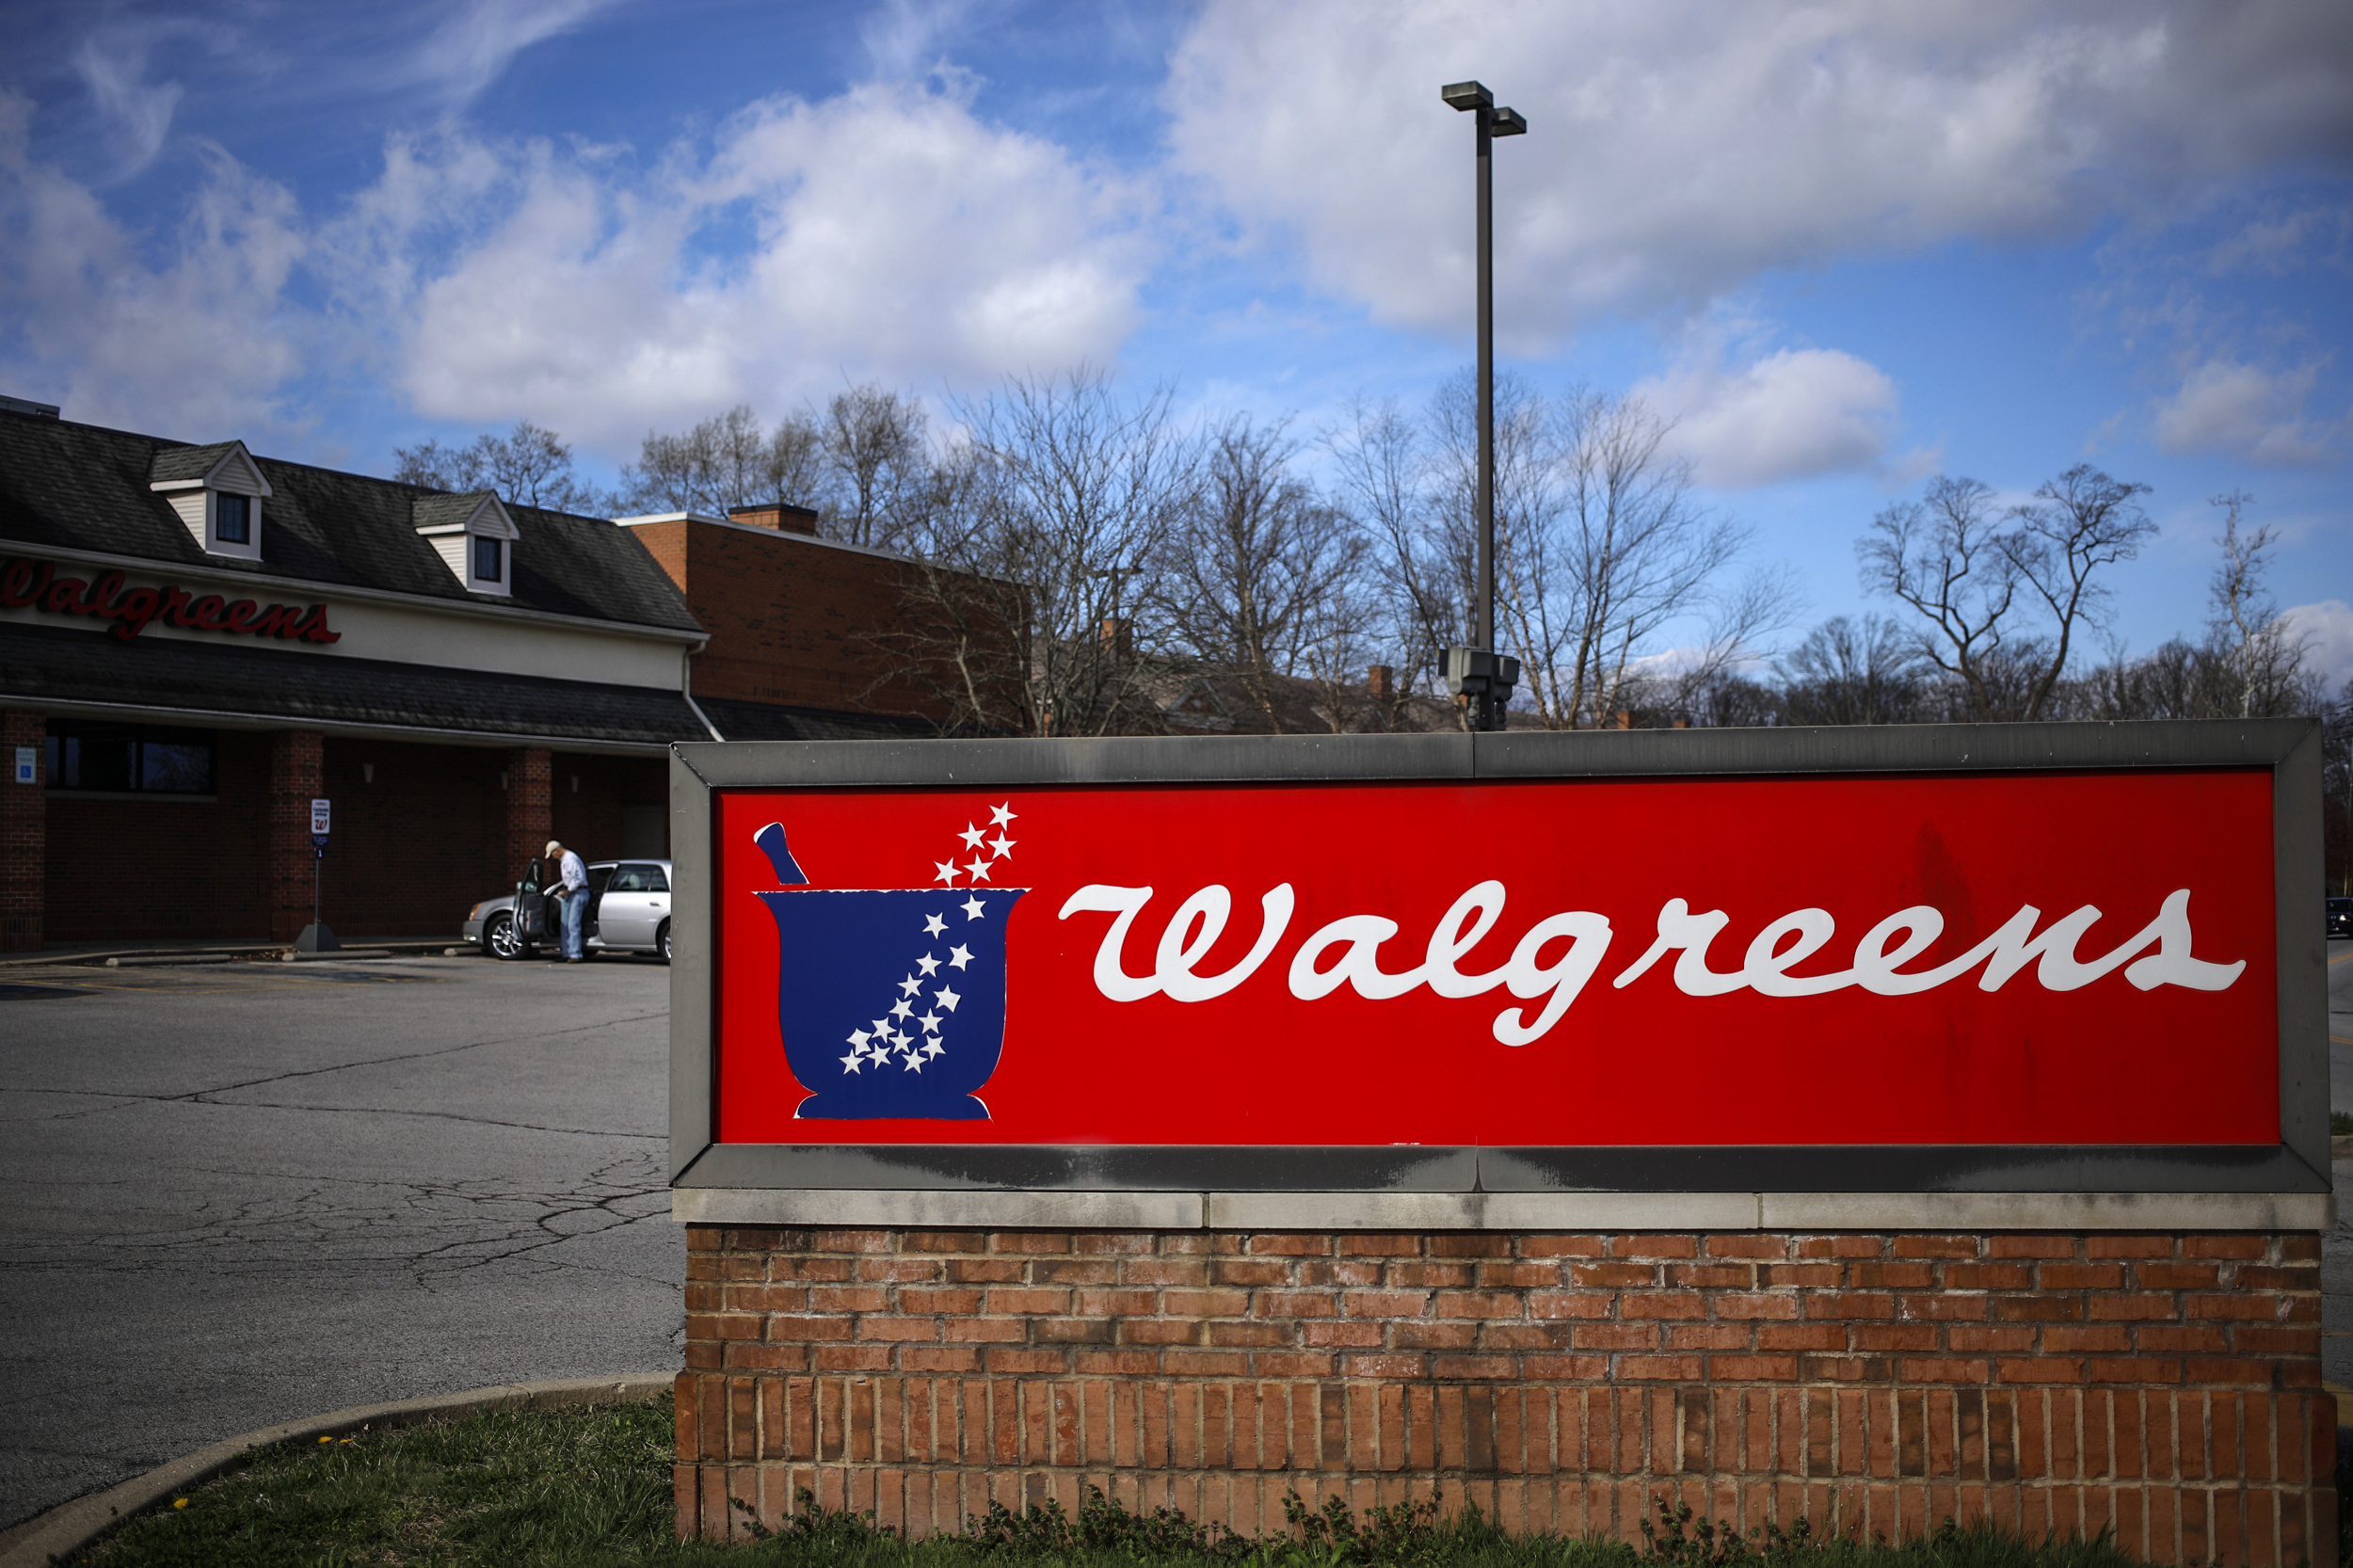 Get Your Walgreens Booster Shots Appoinment Near Me at Walgreens Pharmacy – COVID19